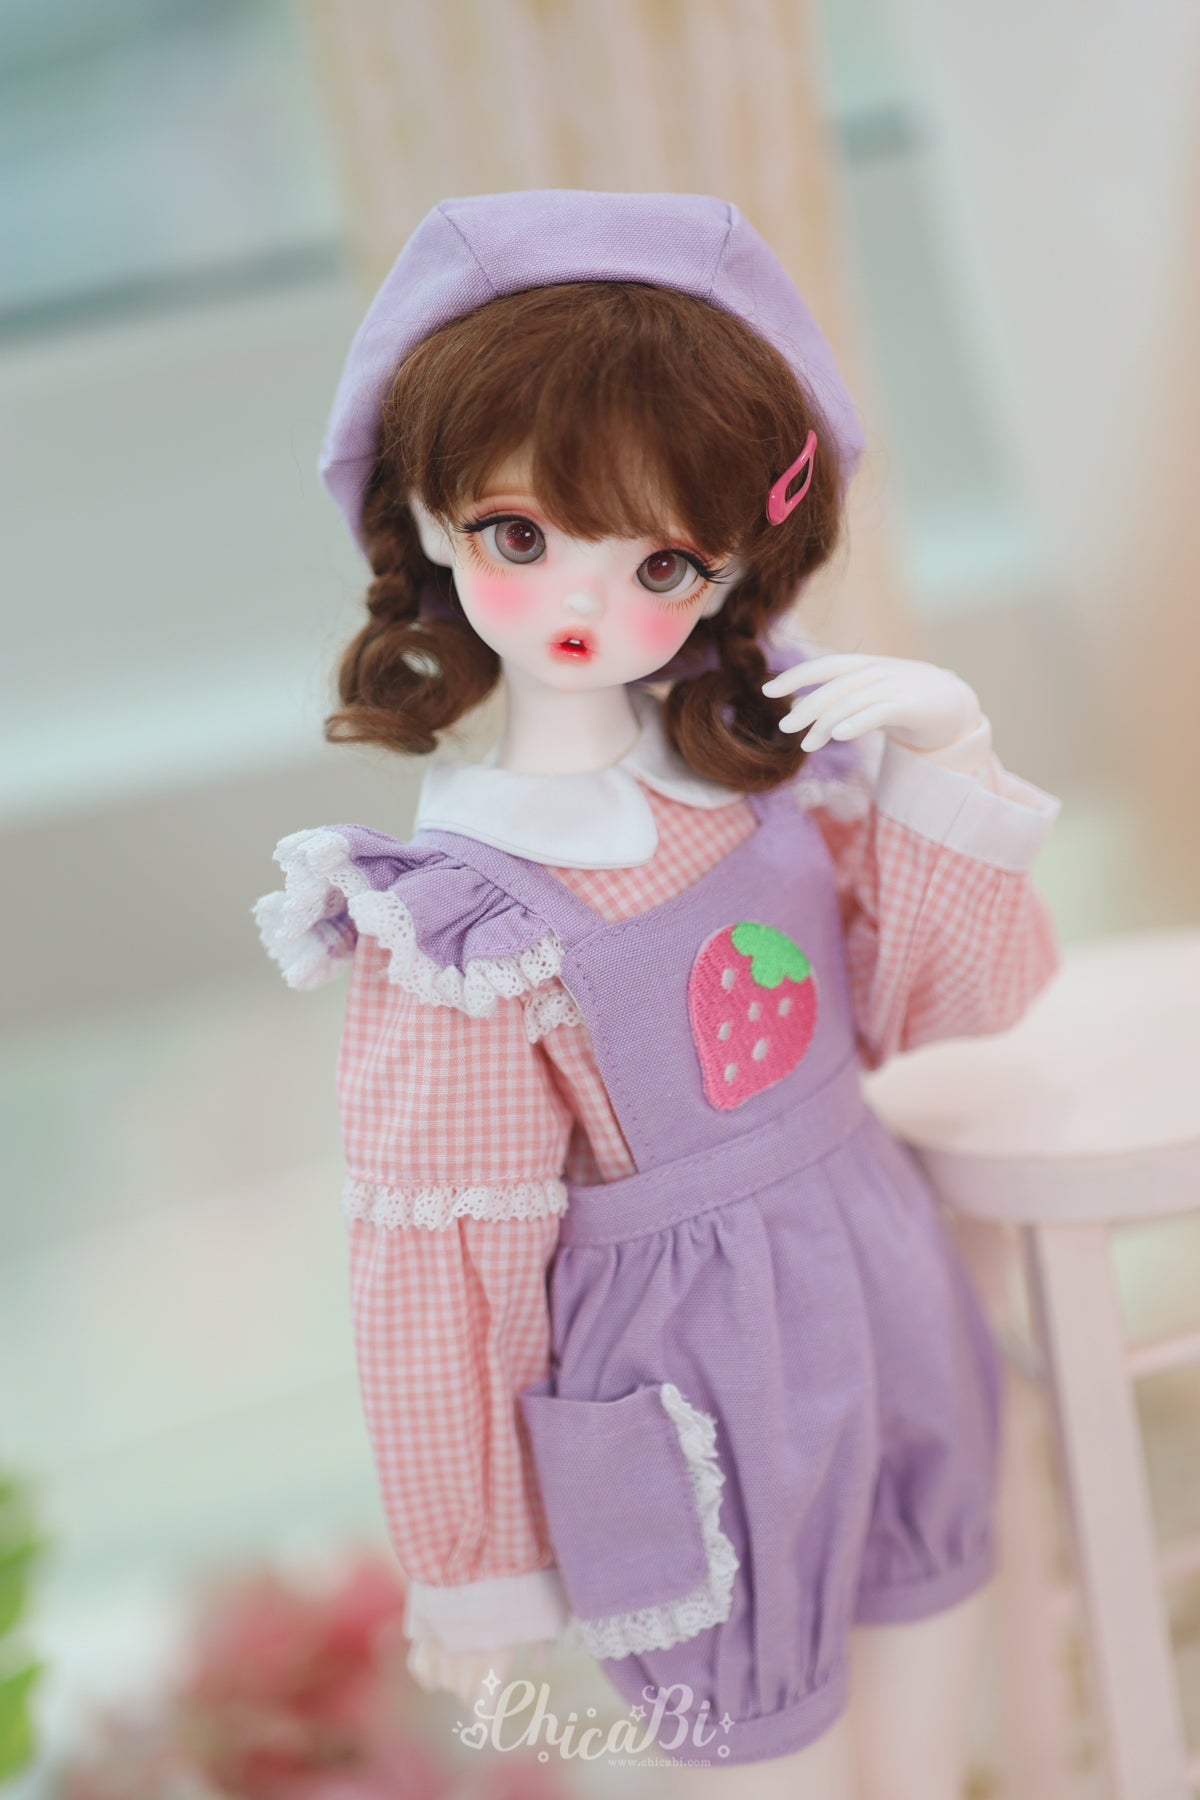 chicabi doll price